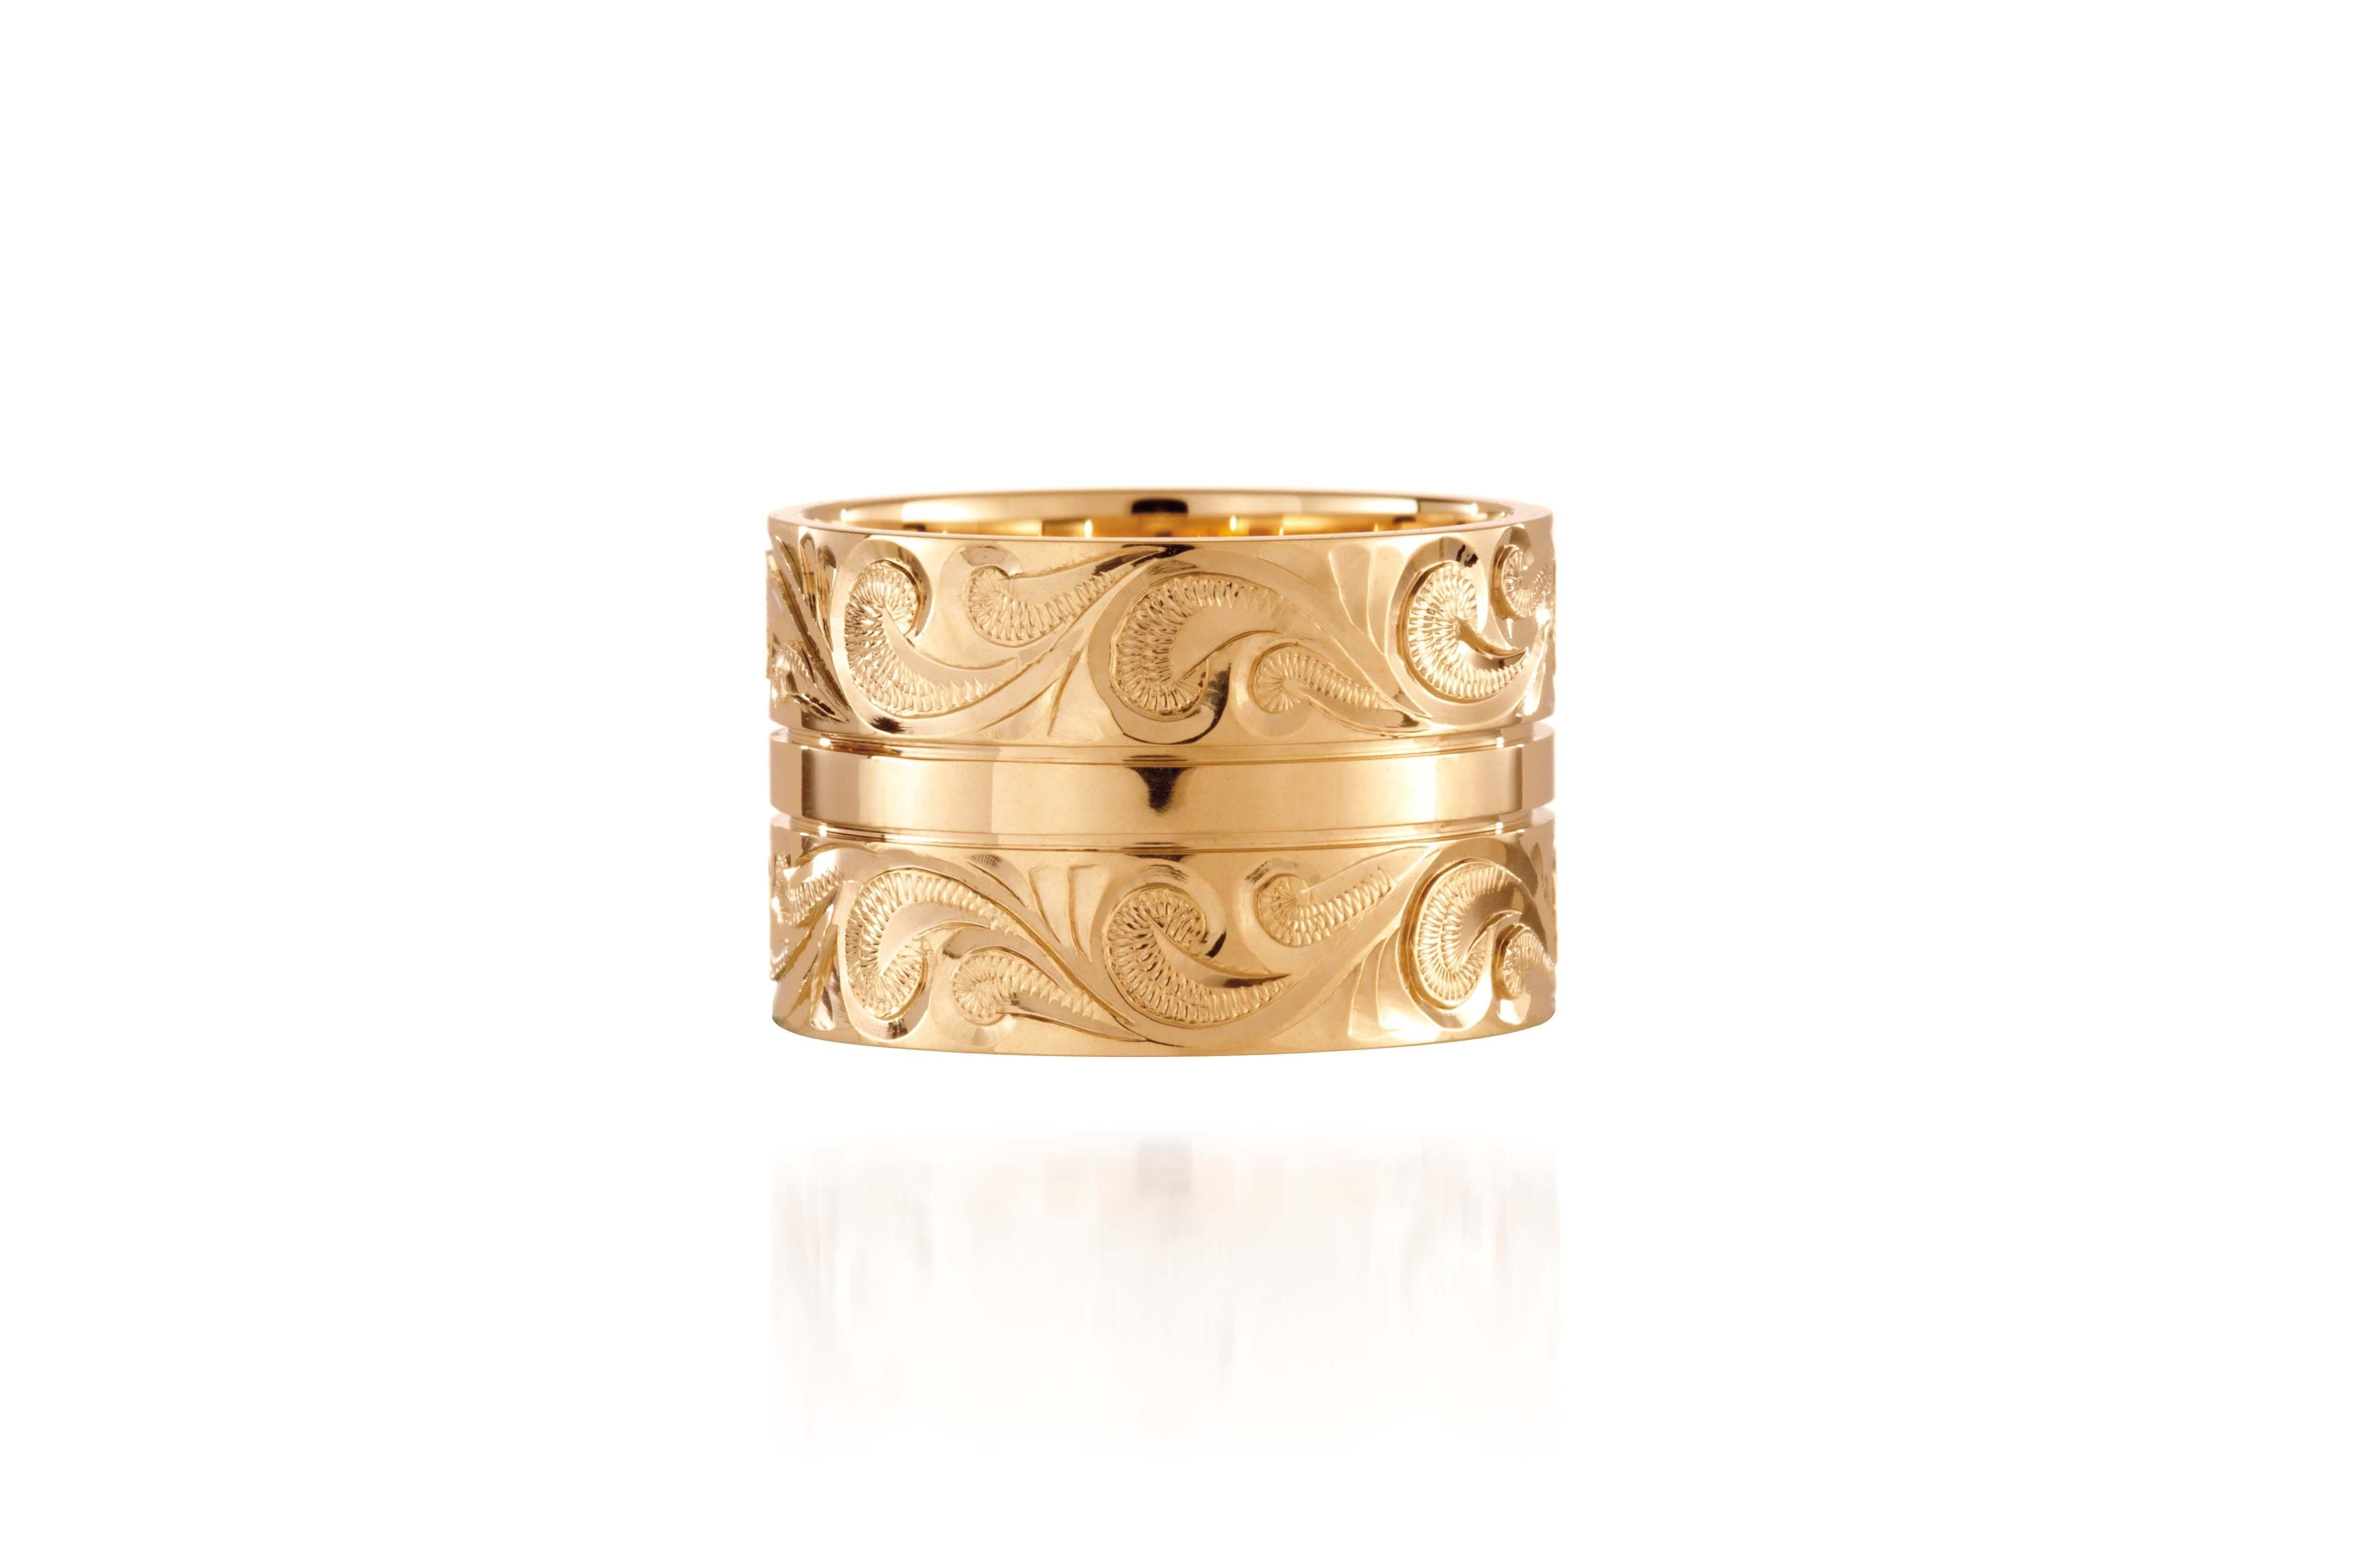 The picture shows a 14K yellow gold 12 mm ring with hand engravings.